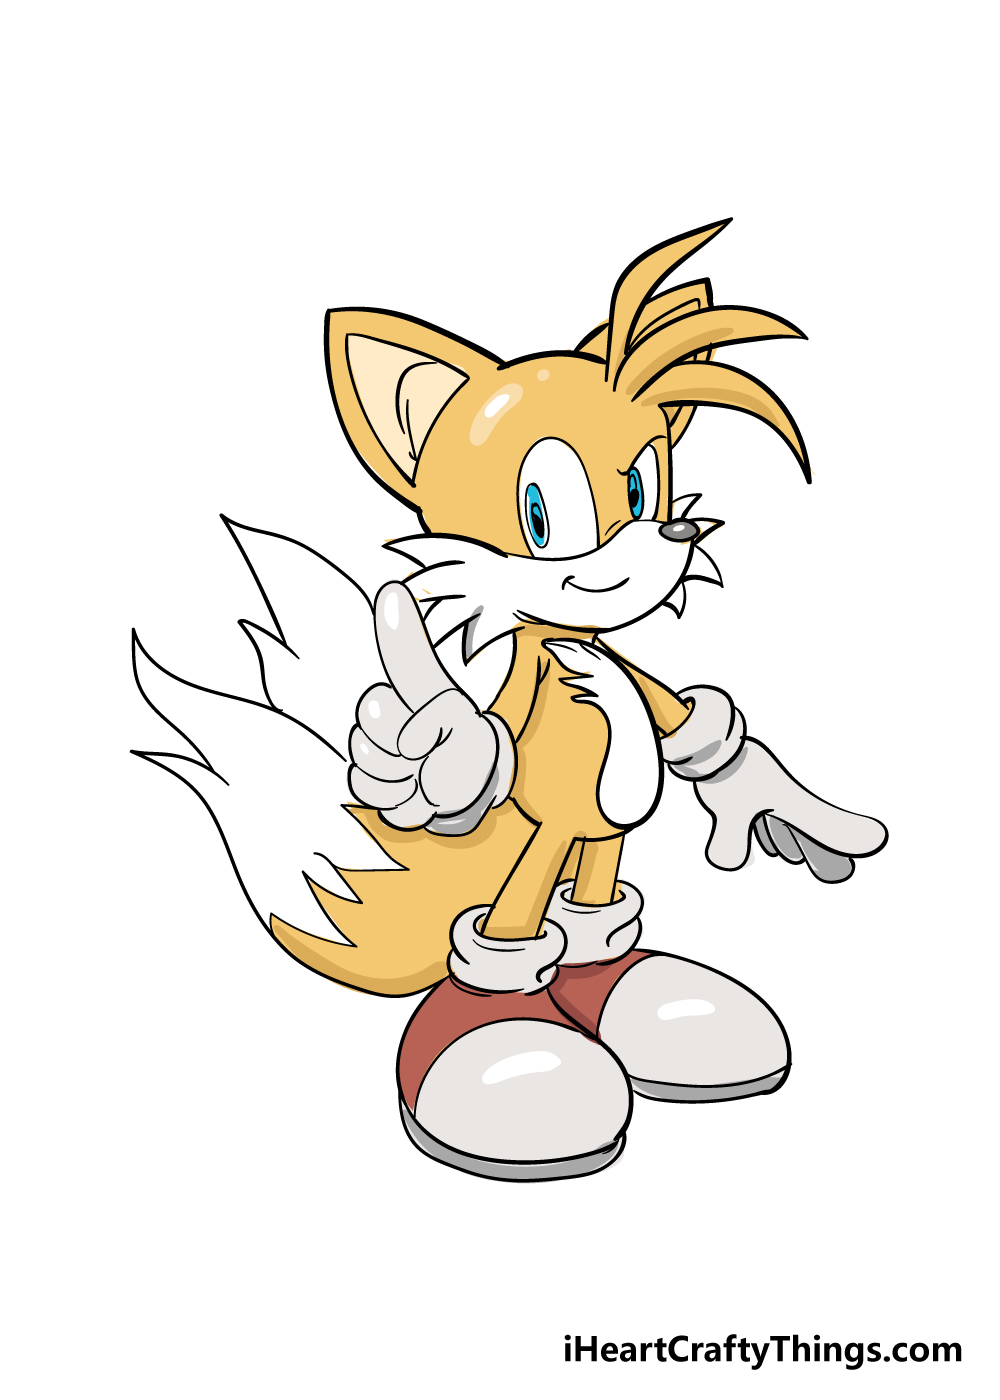 Best How To Draw Tails The Fox Step By Step of all time Check it out now 